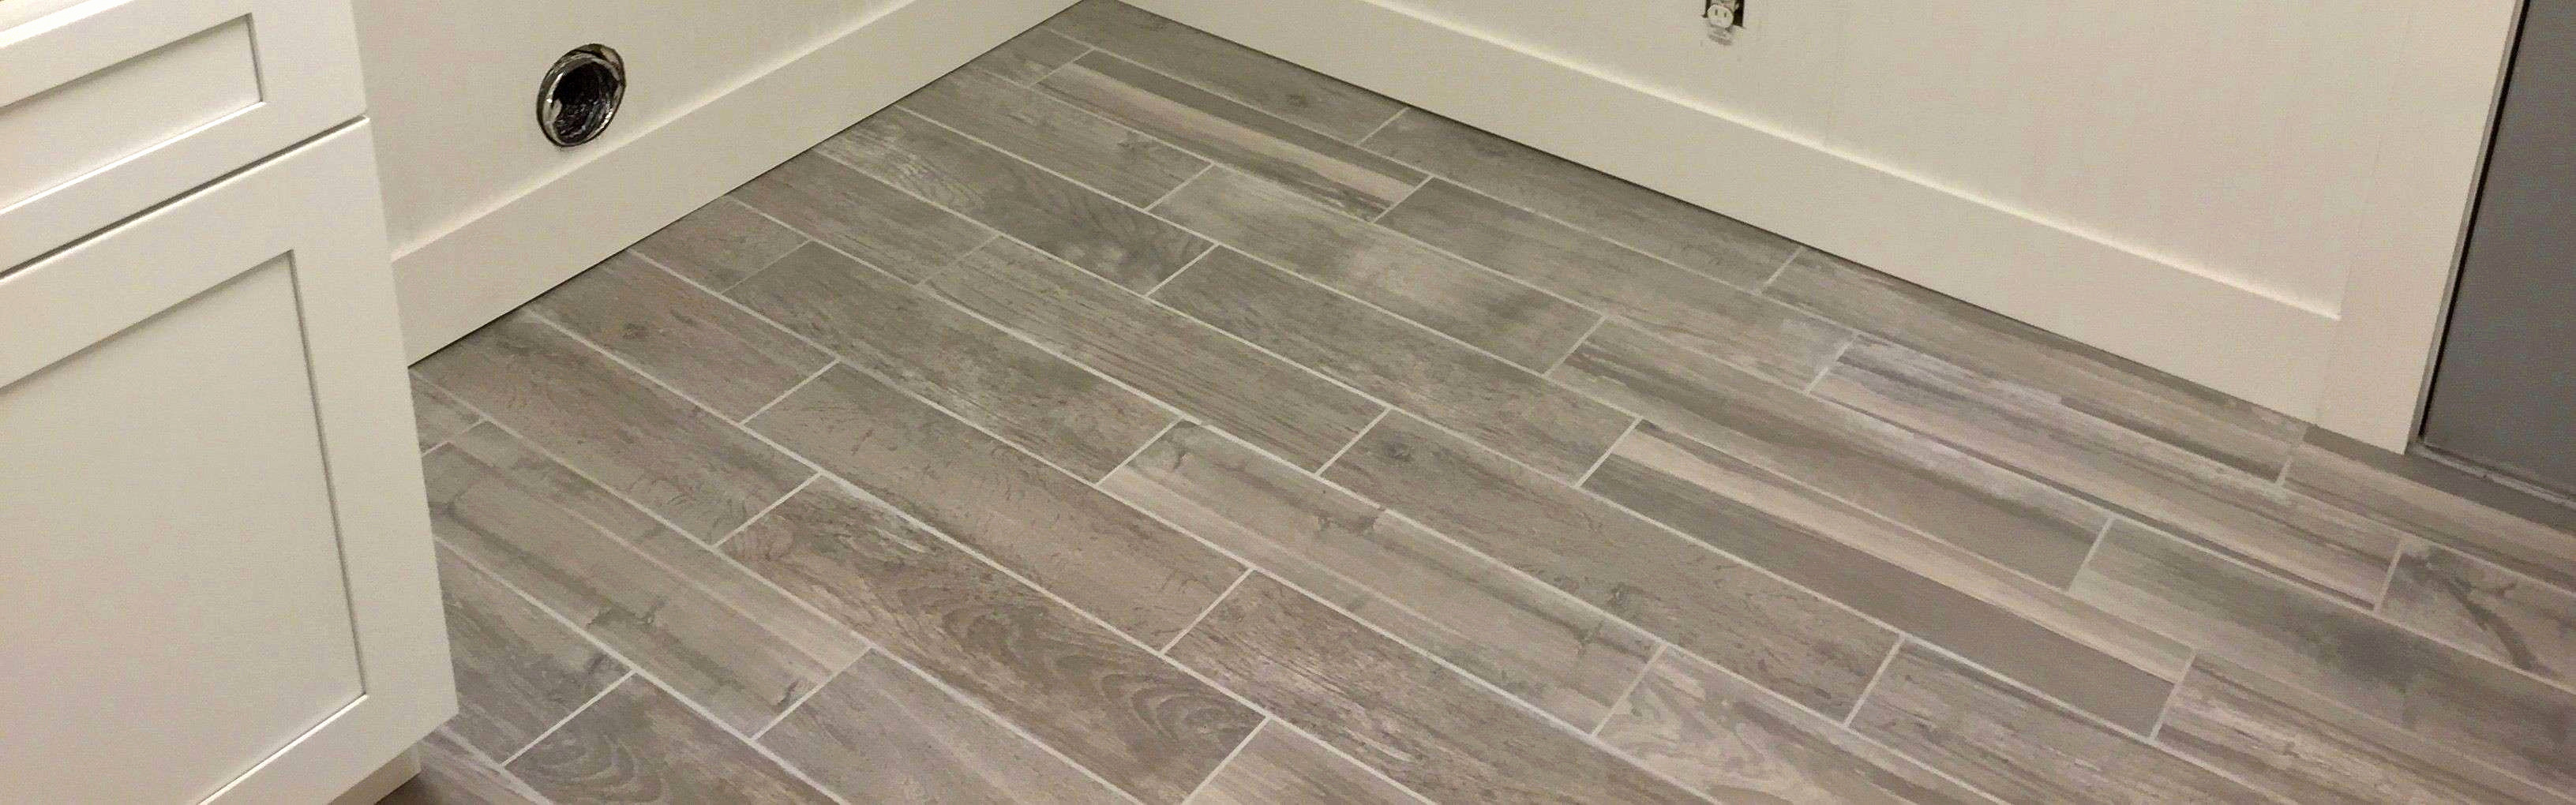 30 attractive How to Install Engineered Hardwood Flooring In Basement 2024 free download how to install engineered hardwood flooring in basement of laminate flooring clearance installing peel and stick laminate inside unique bathroom tiling ideas best h sink install bathroom i 0